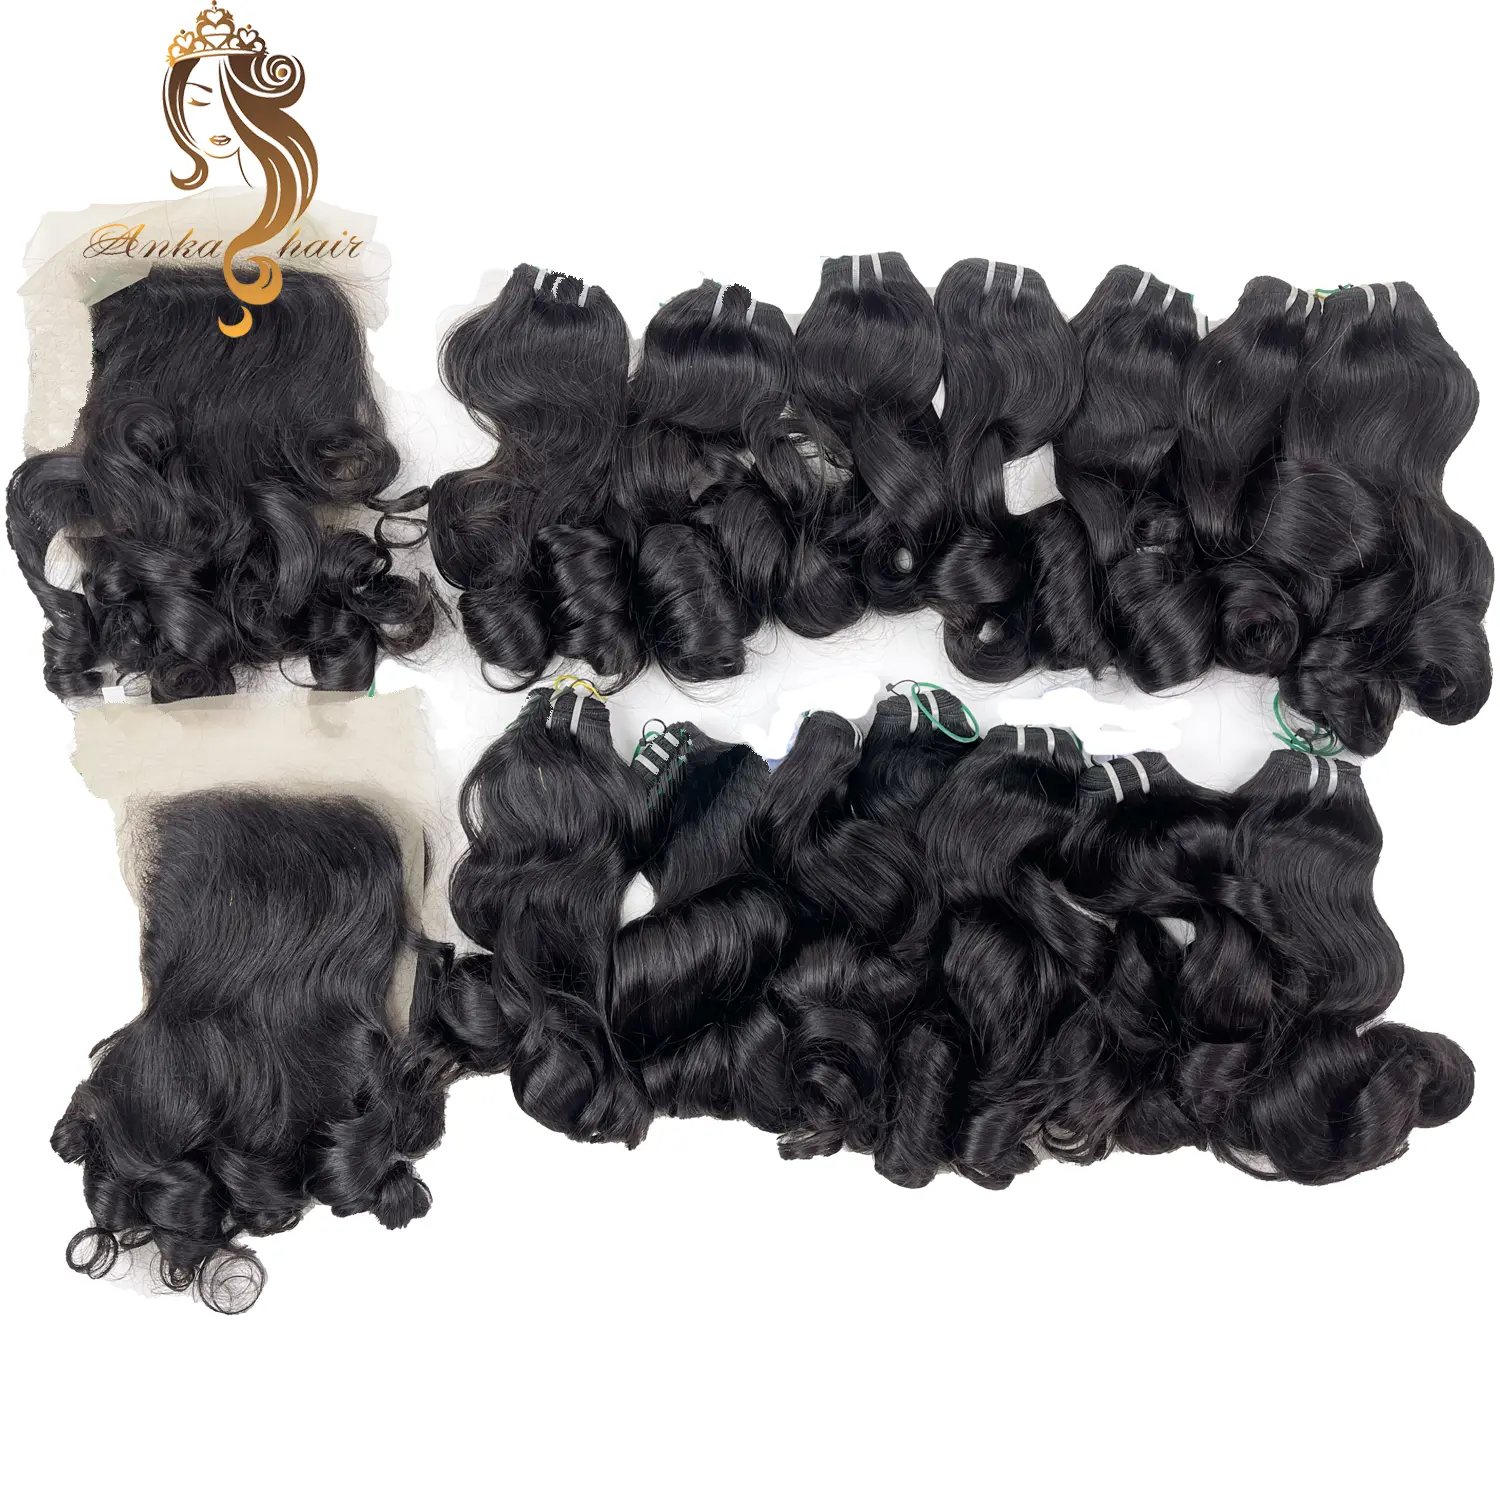 Perfect black curly hair style - machine weft hair products with 5-star quality from ANKA Hair